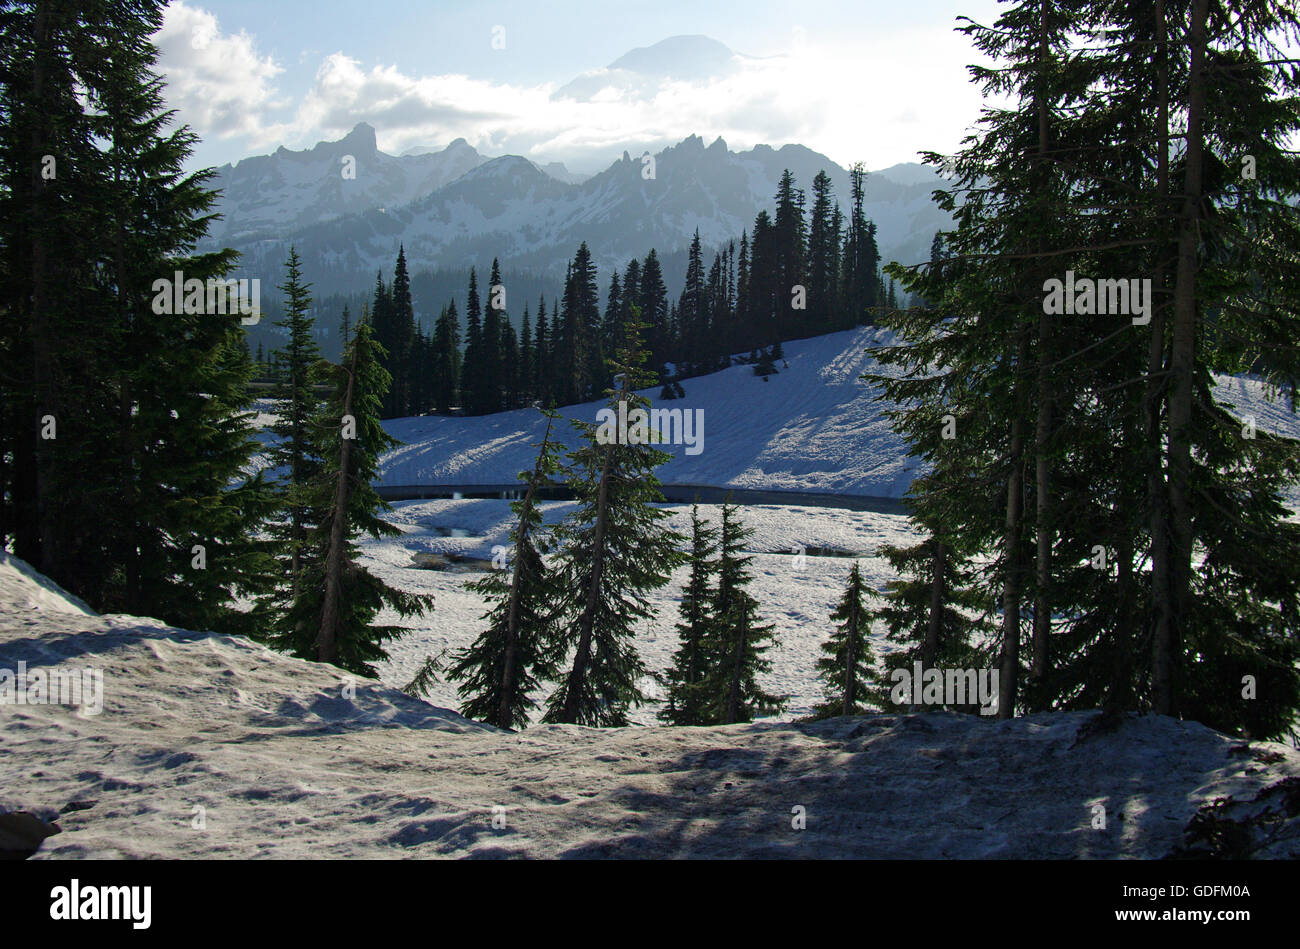 The breathtakingly beautiful Chinook Pass in the Cascade Mountains in Washington's Mount Rainier National Park is still covered in snow in July. Stock Photo